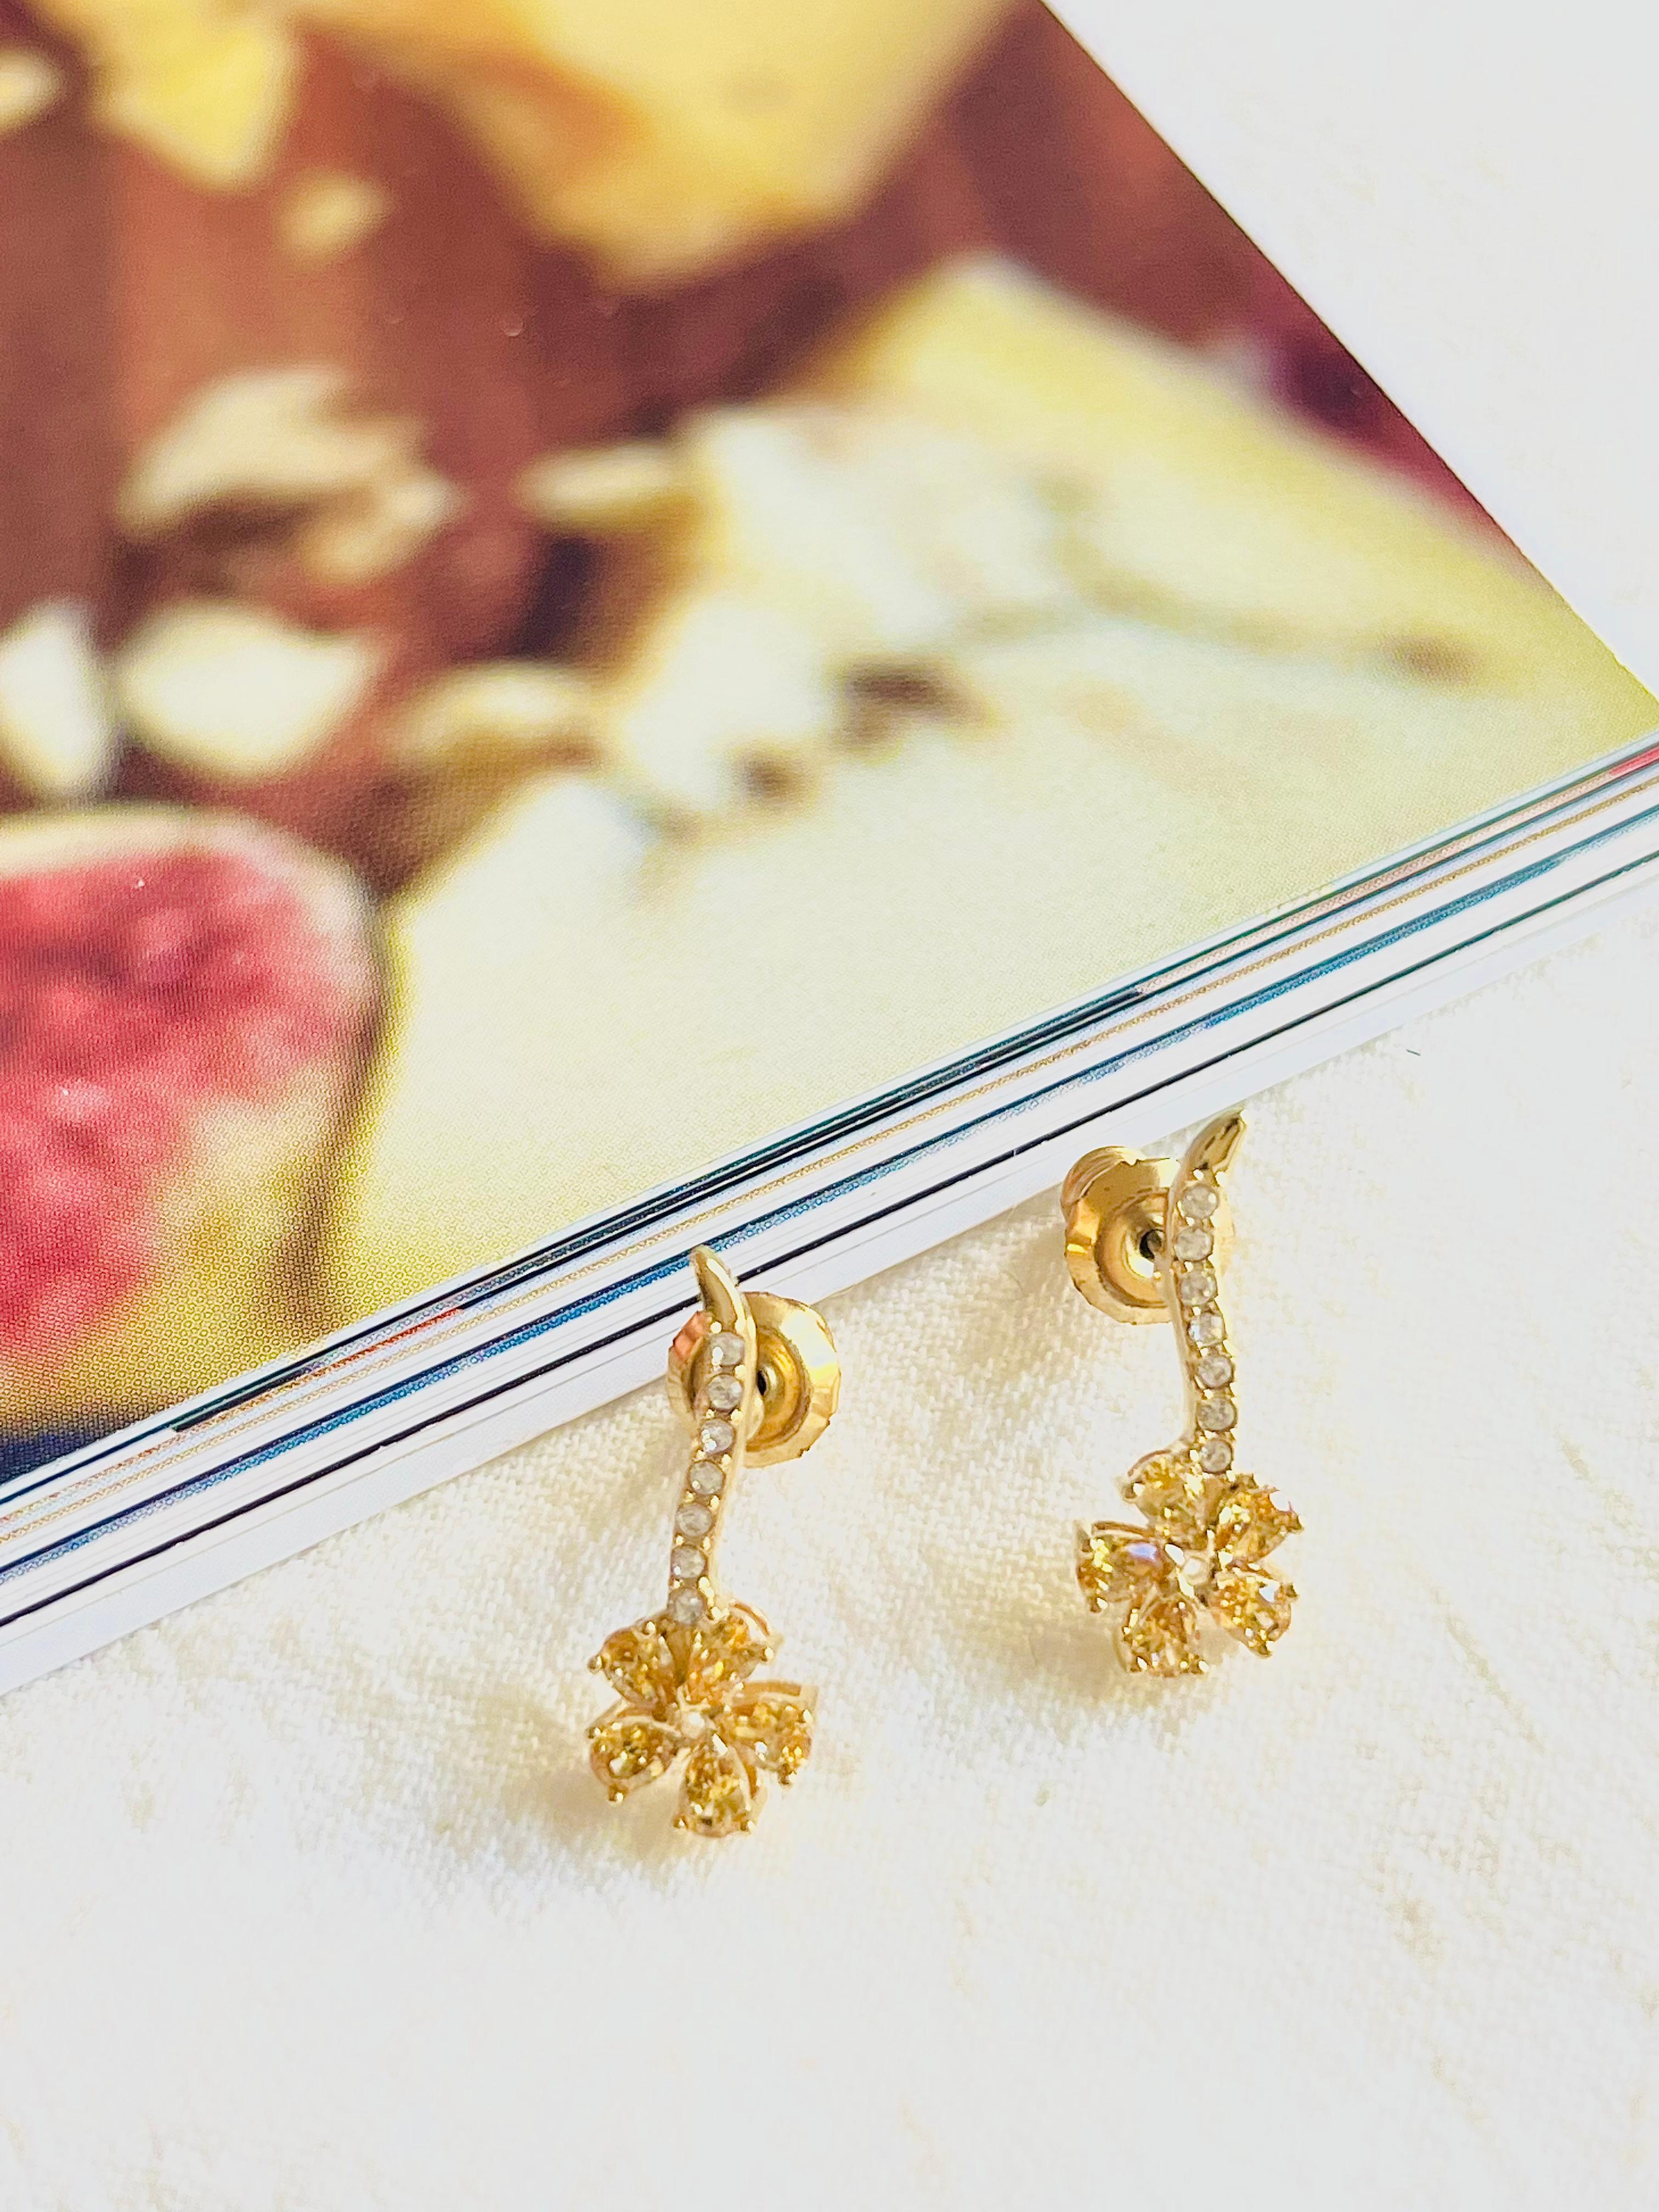 This pair of pierced earrings is inspired by endangered flora. Featuring a floral motif in yellow crystal with pavé embellishment, this gold-tone plated design is feminine and elegant. Pair with other pieces from the collection to complete your